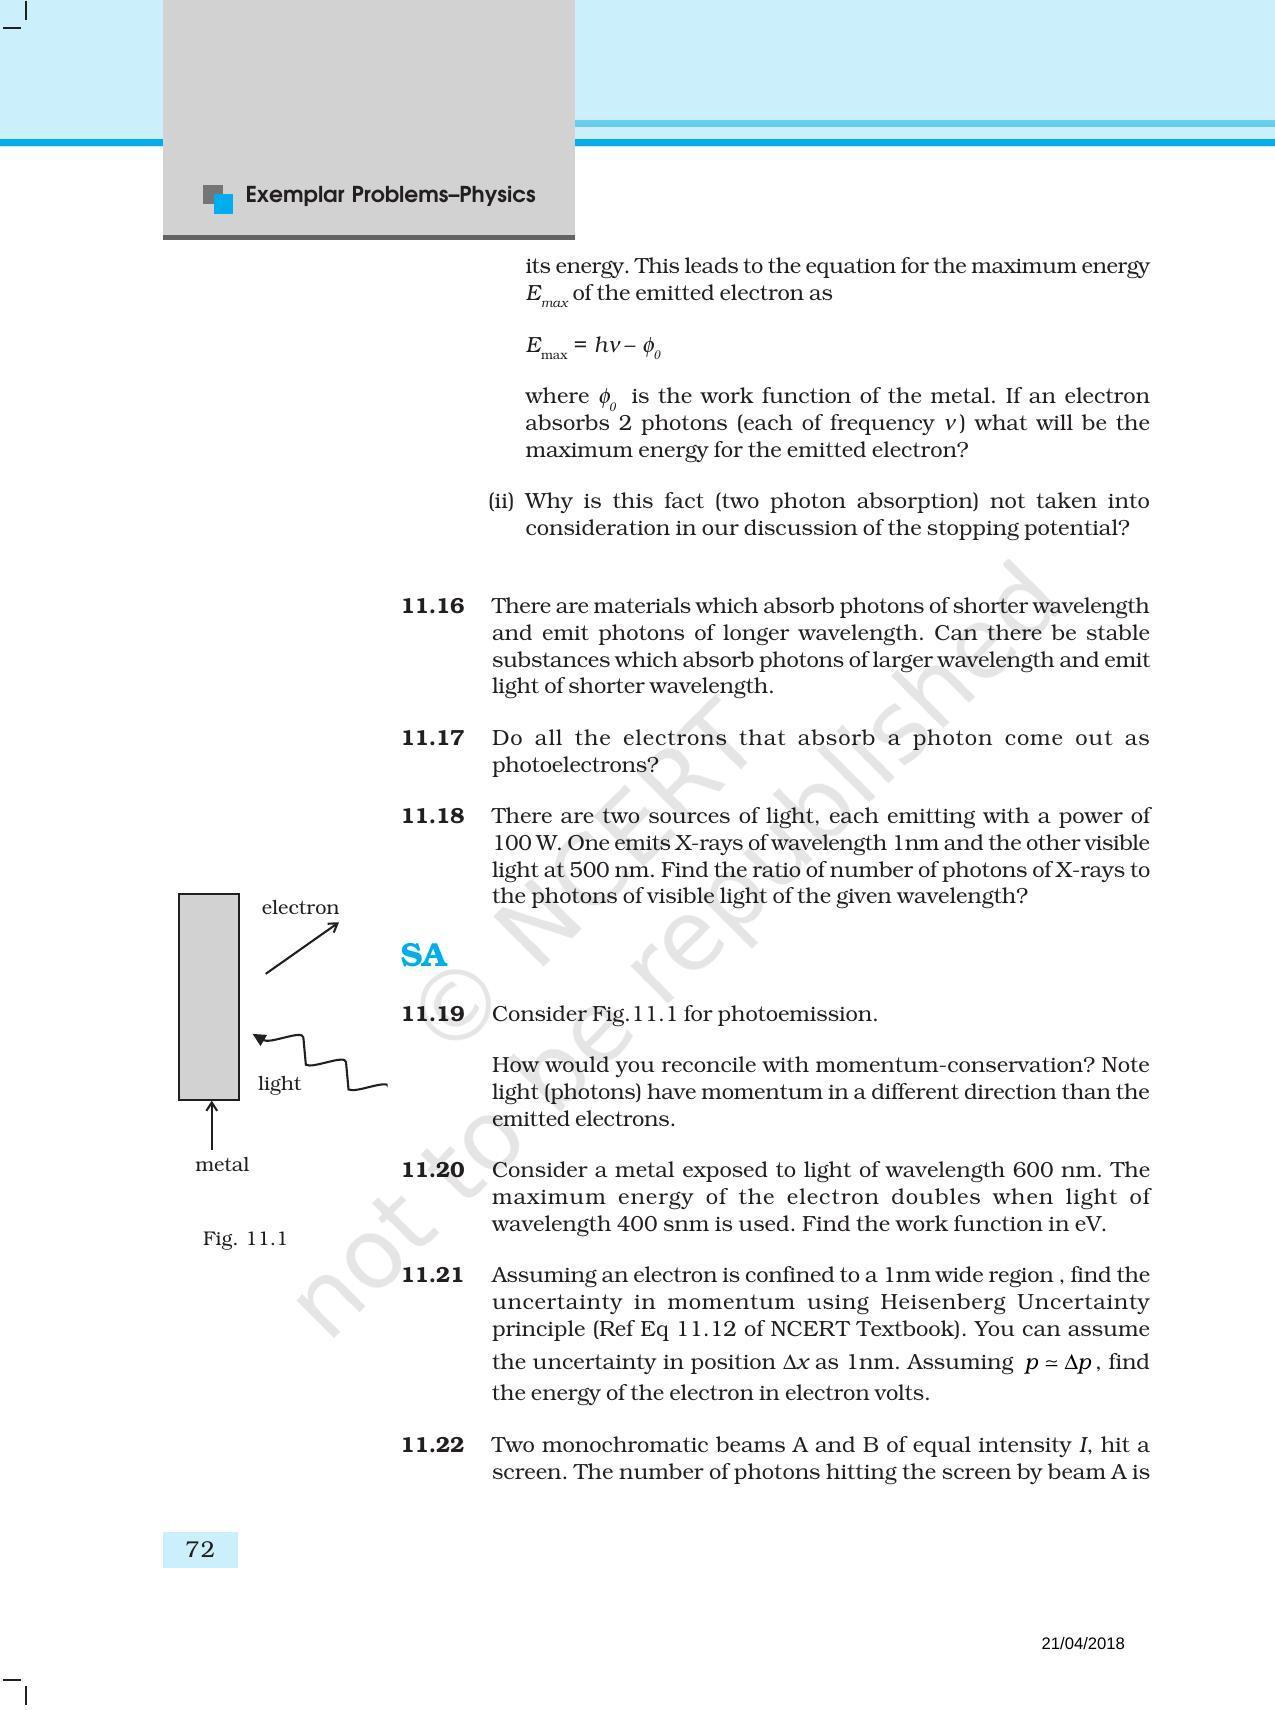 NCERT Exemplar Book for Class 12 Physics: Chapter 11 Dual Nature of Radiation and Matter - Page 5